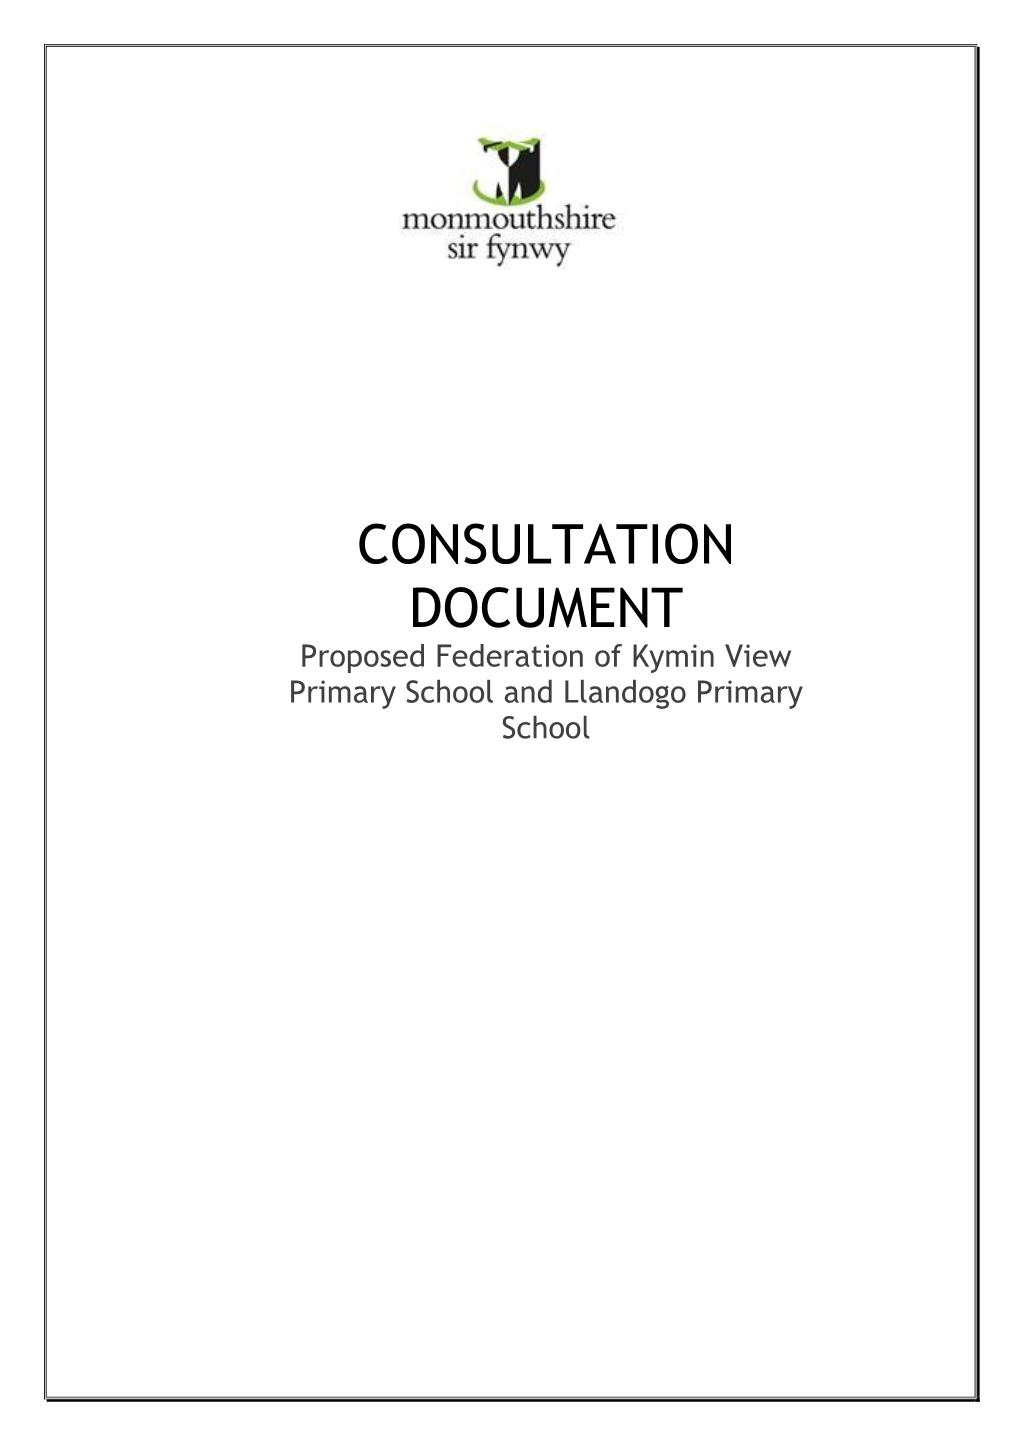 CONSULTATION DOCUMENT Proposed Federation of Kymin View Primary School and Llandogo Primary School